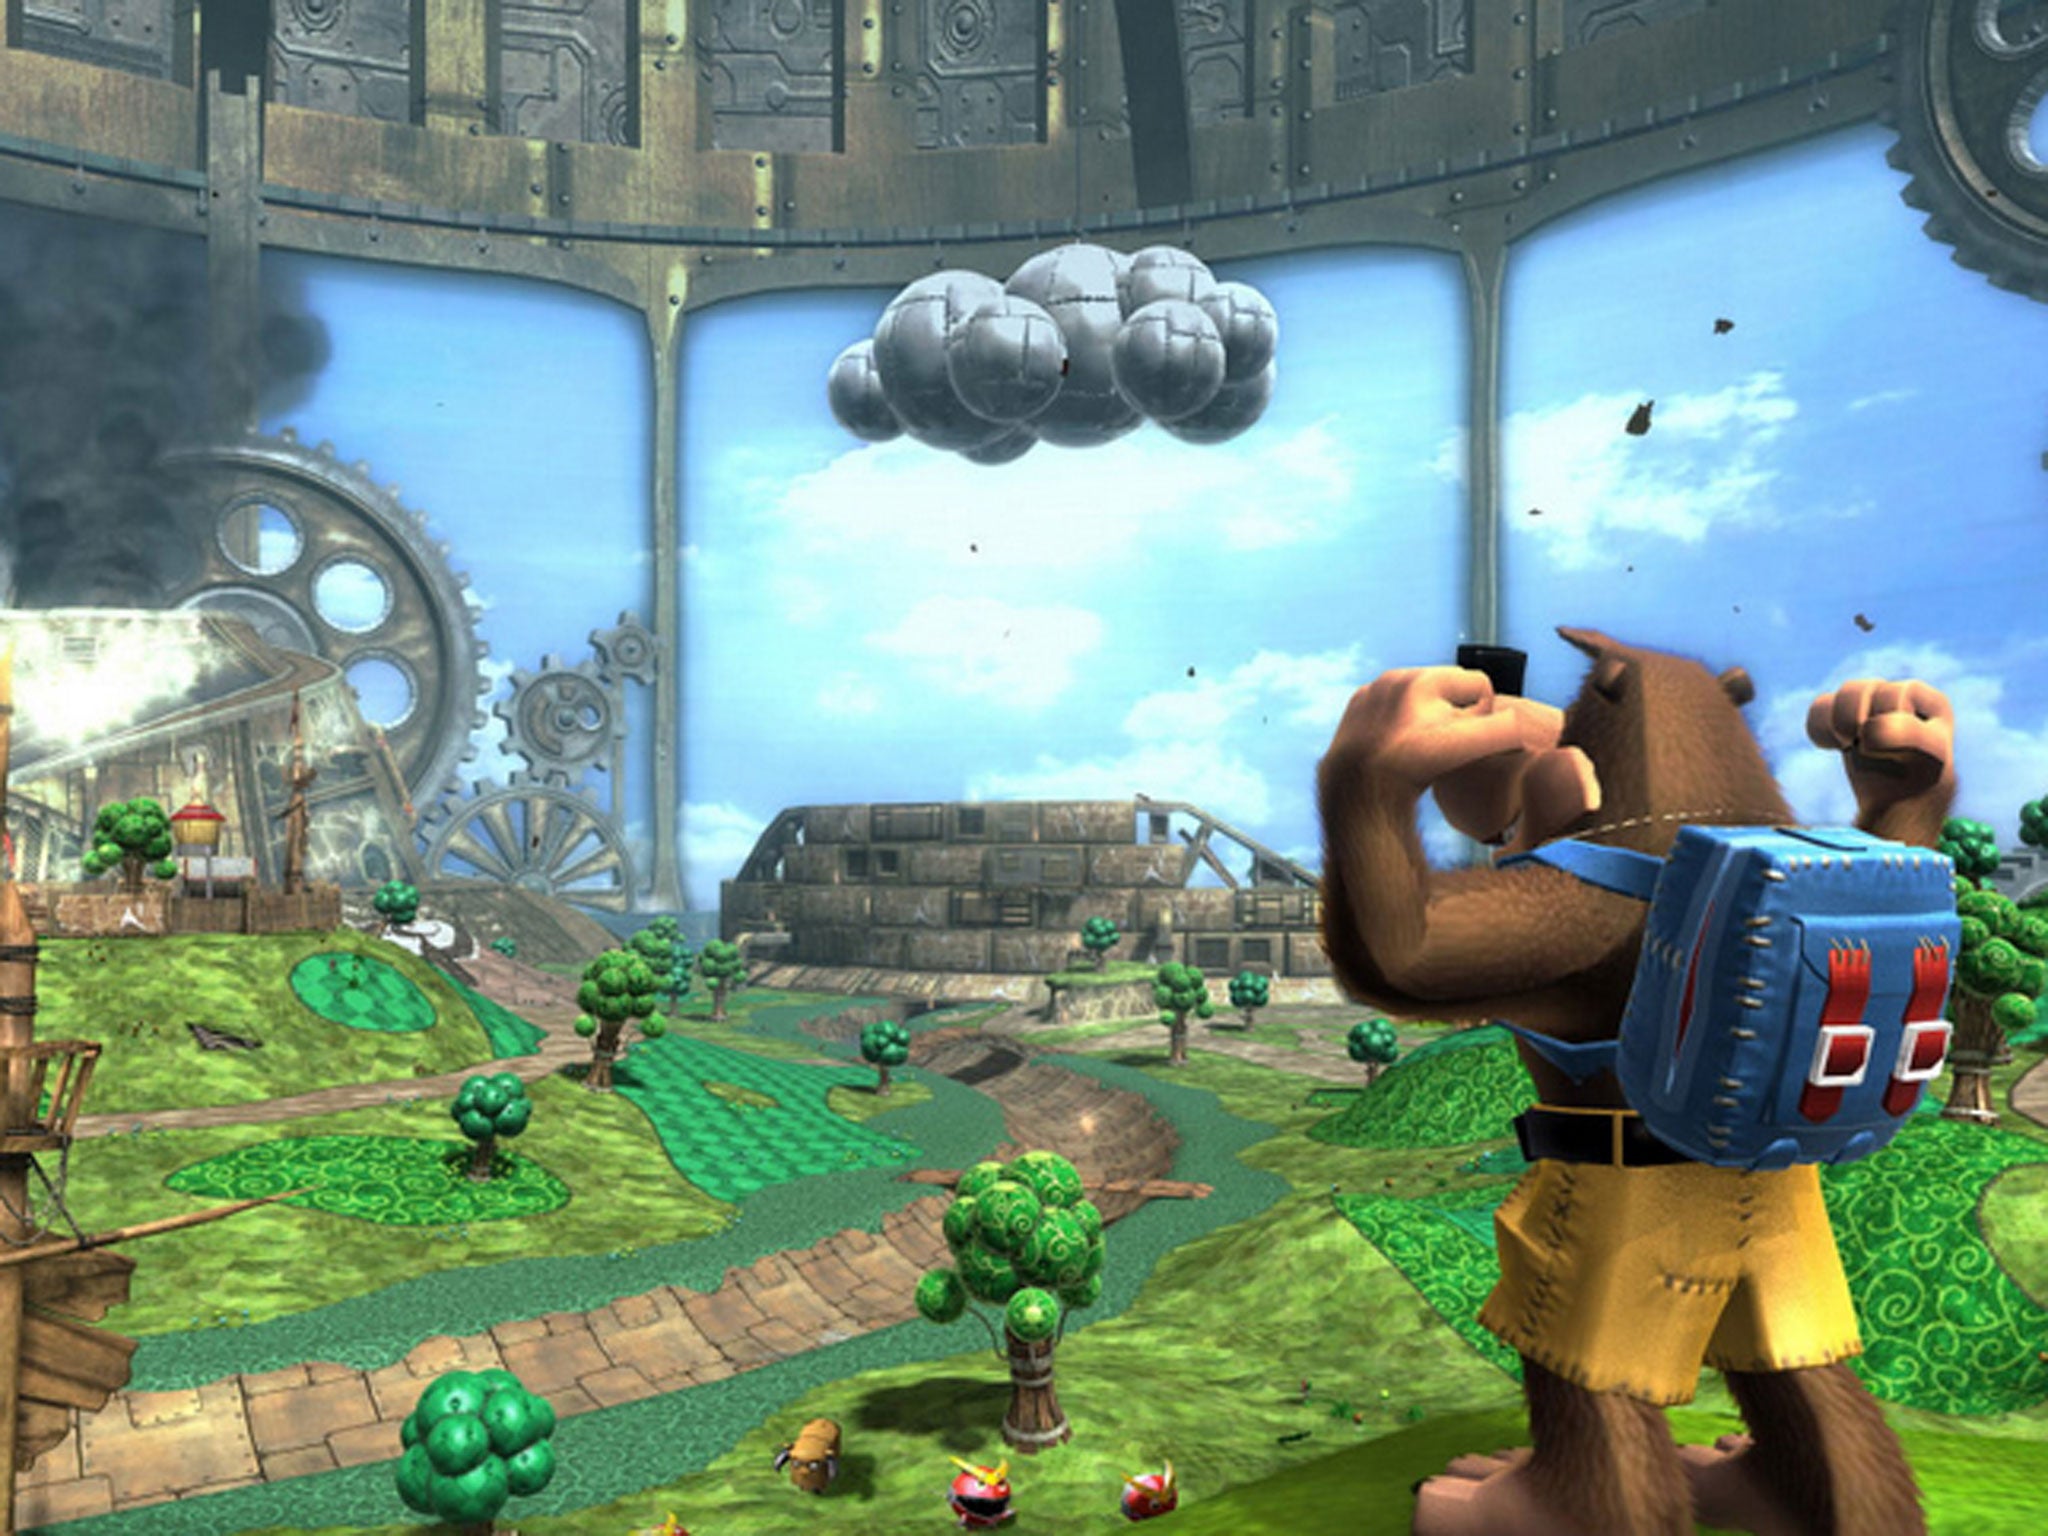 Rare Replay arguably forms the most value-for-money gaming purchase ever